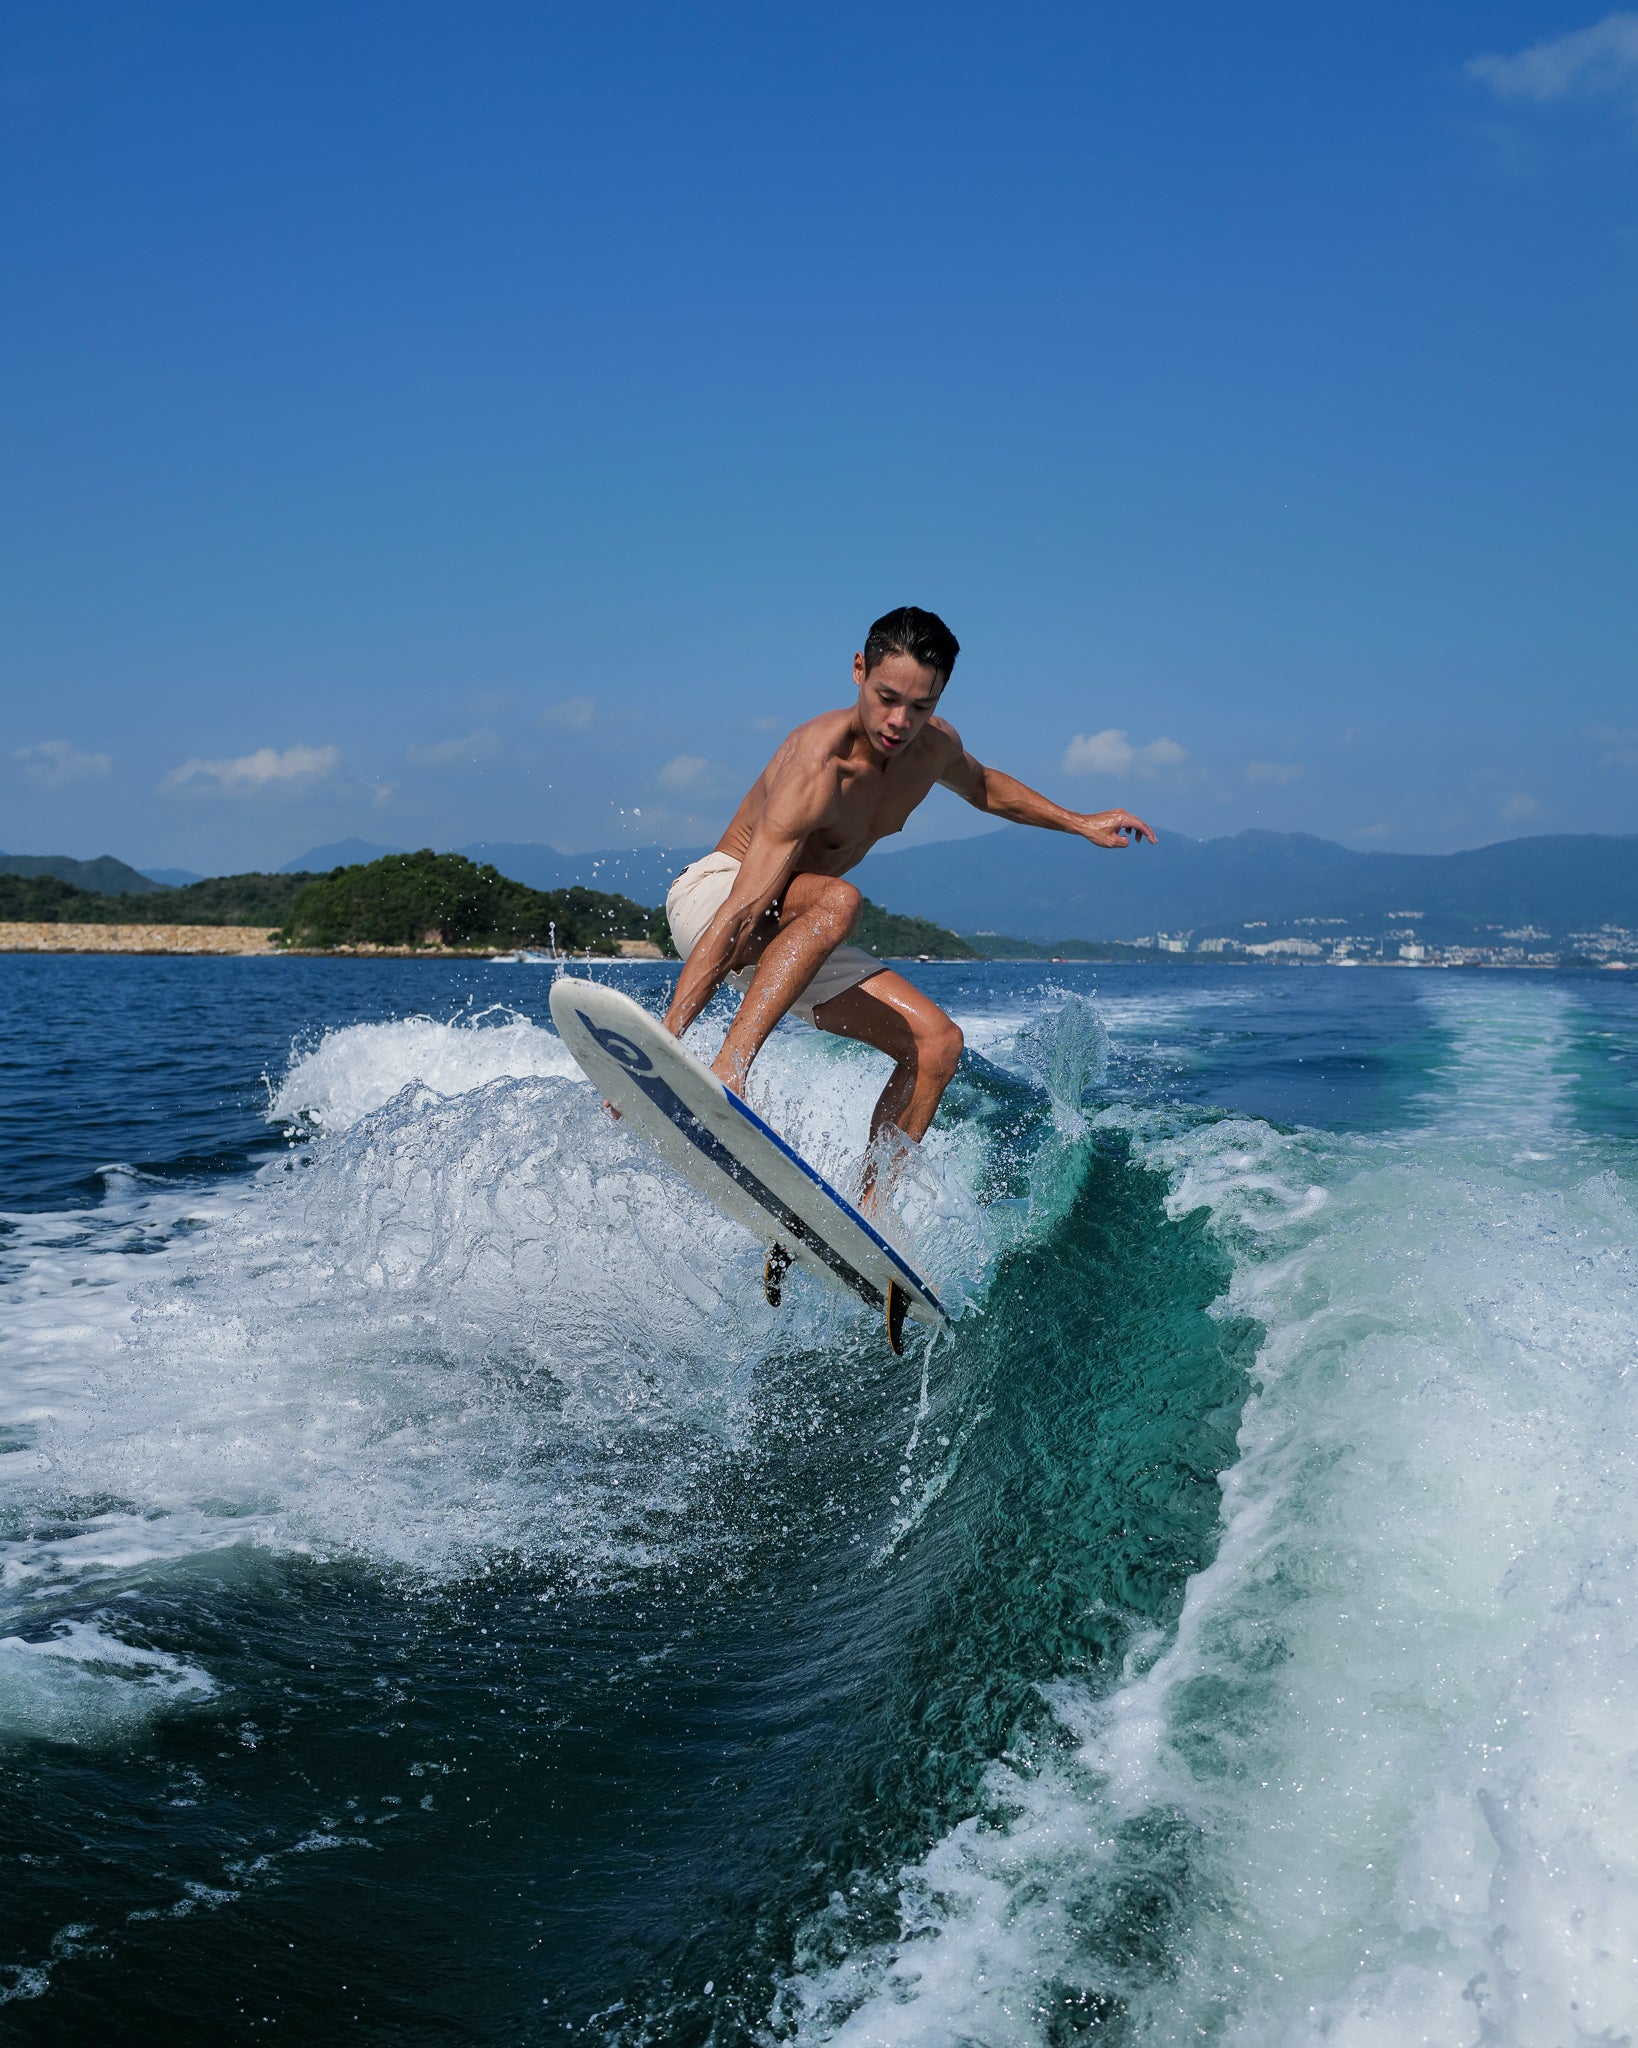 How To Land Your Wakesurf 360